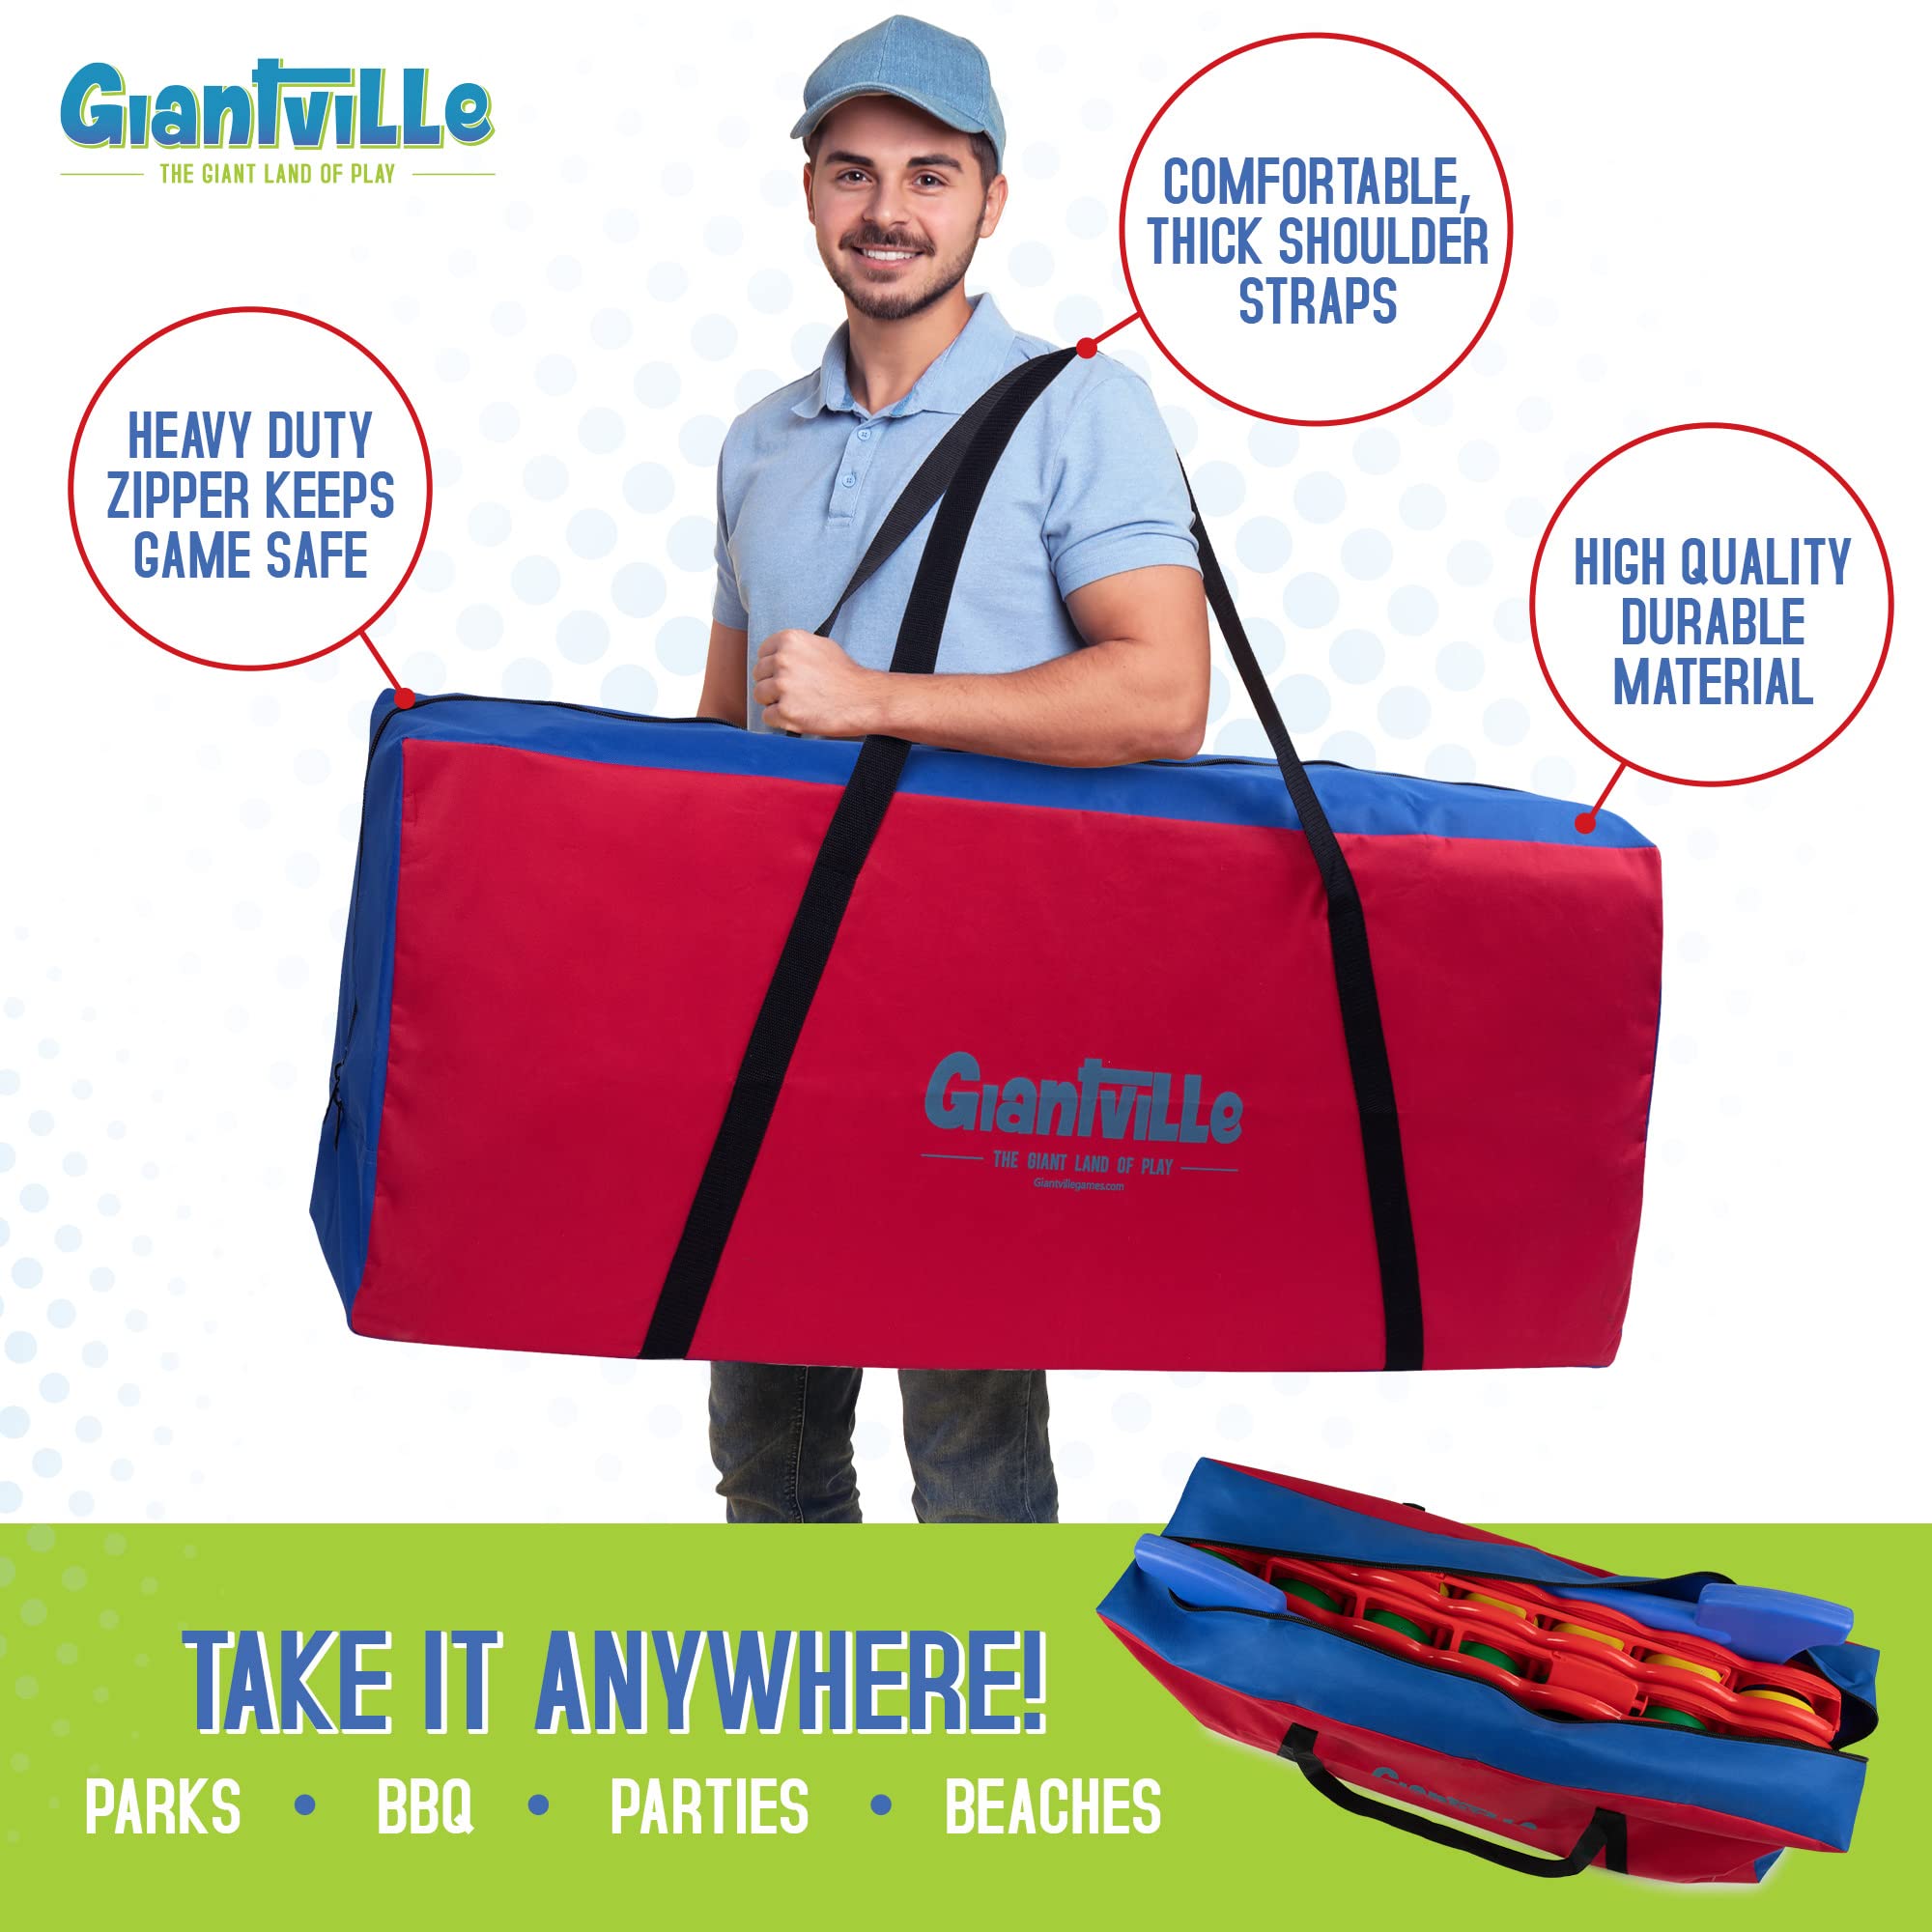 Giantville Giant 4 in a Row Connect Game + Storage Carry Bag - 4